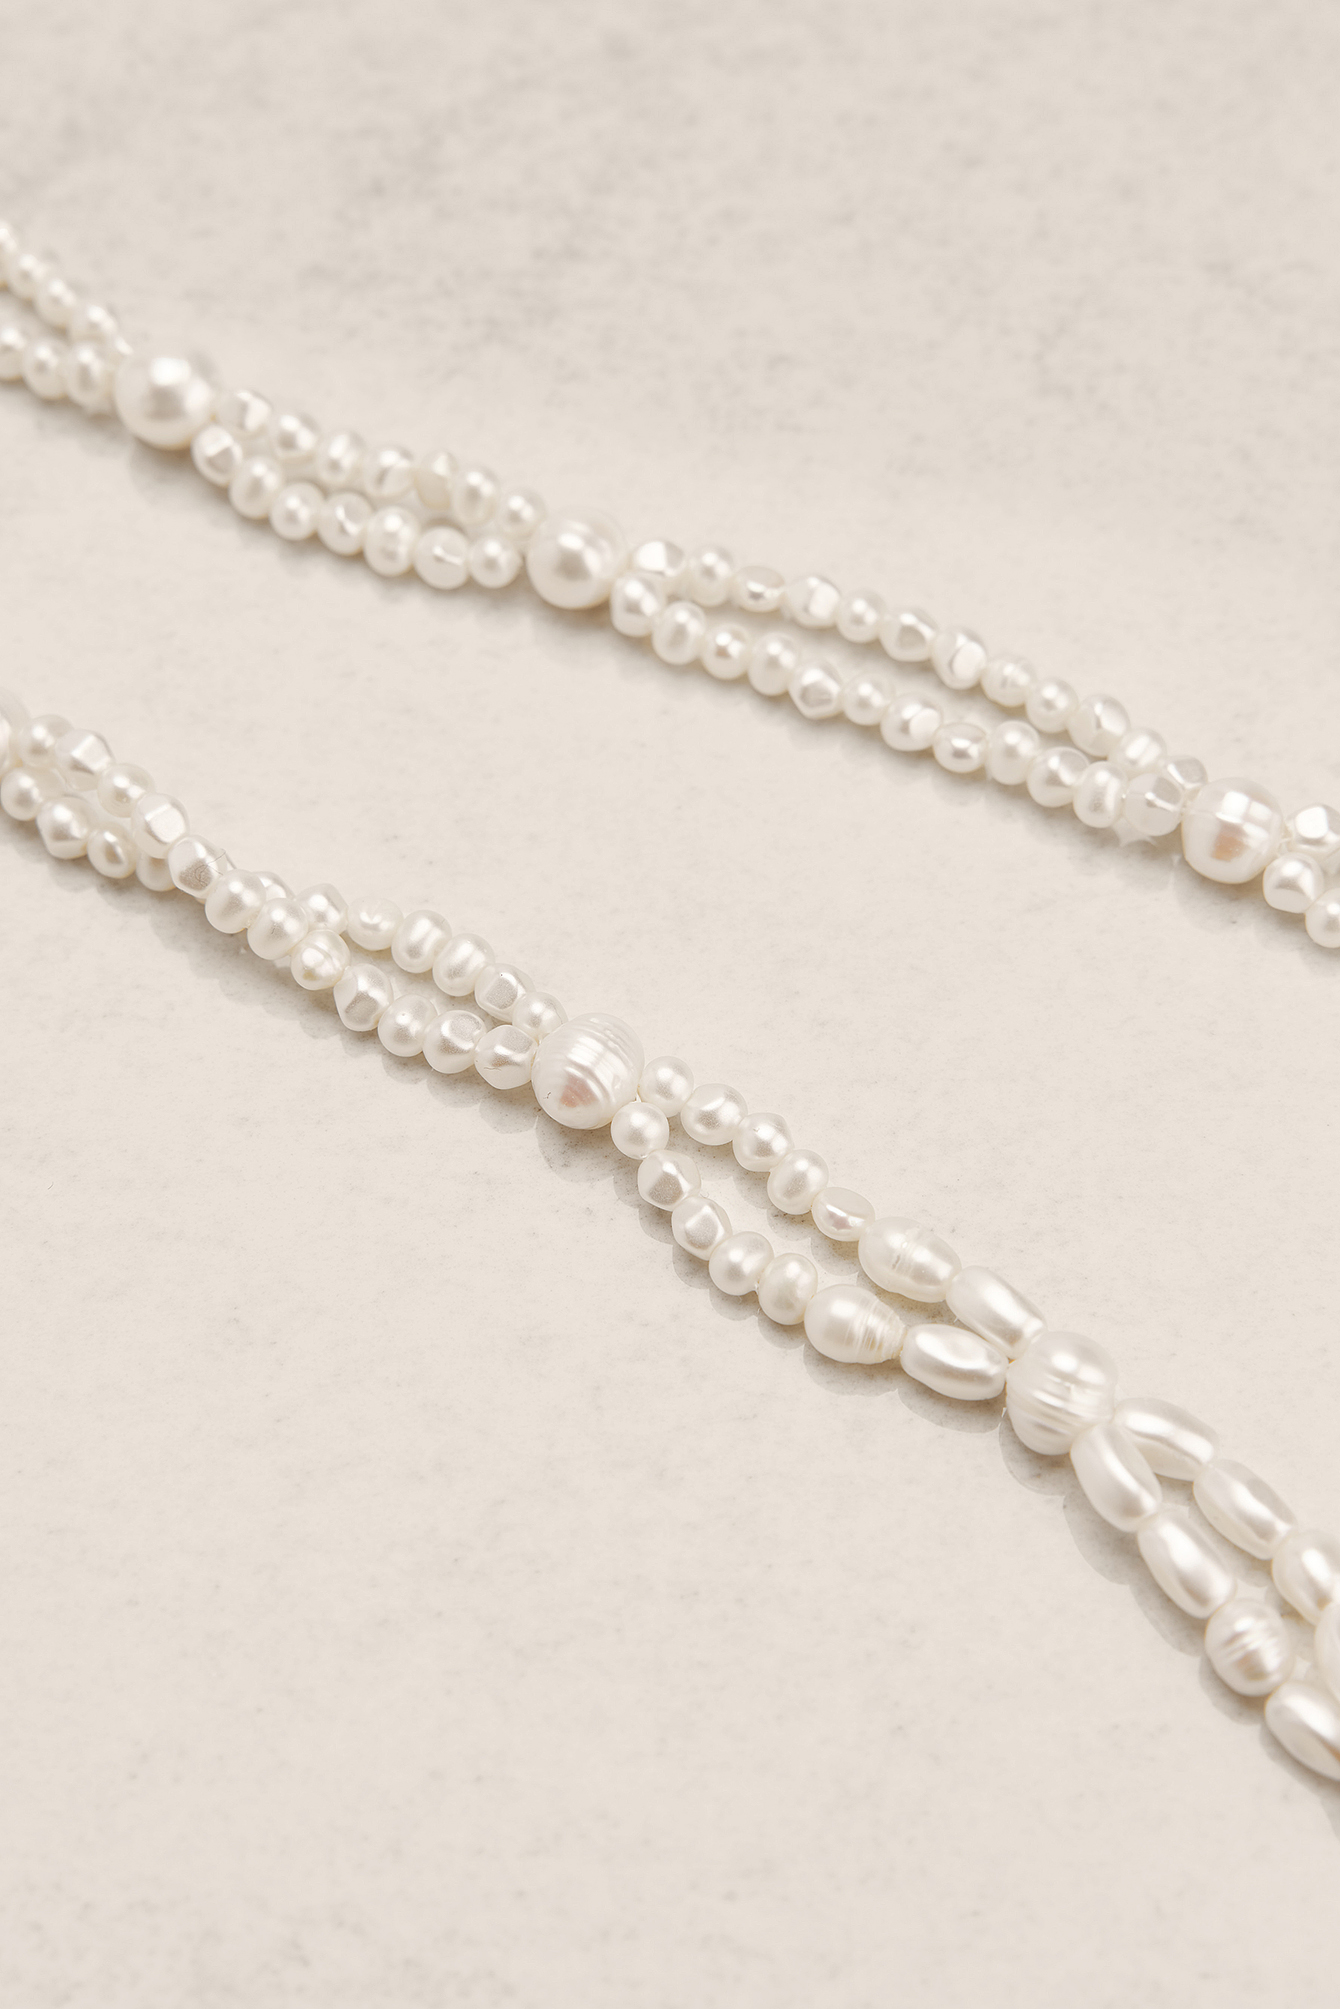 White Knotted Pearl necklace